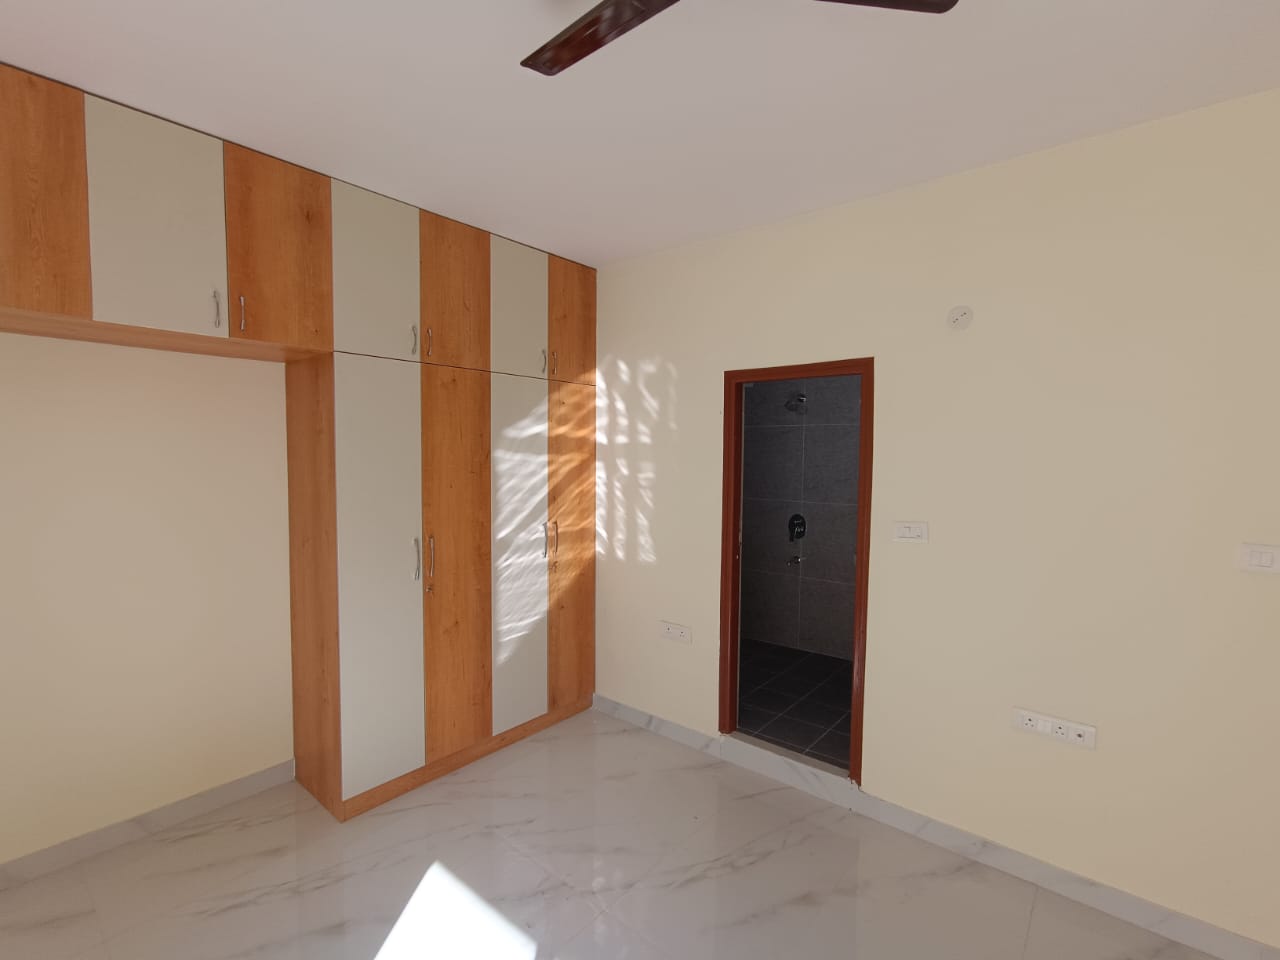 2 BHK Residential Apartment for Lease Only in Ejipura